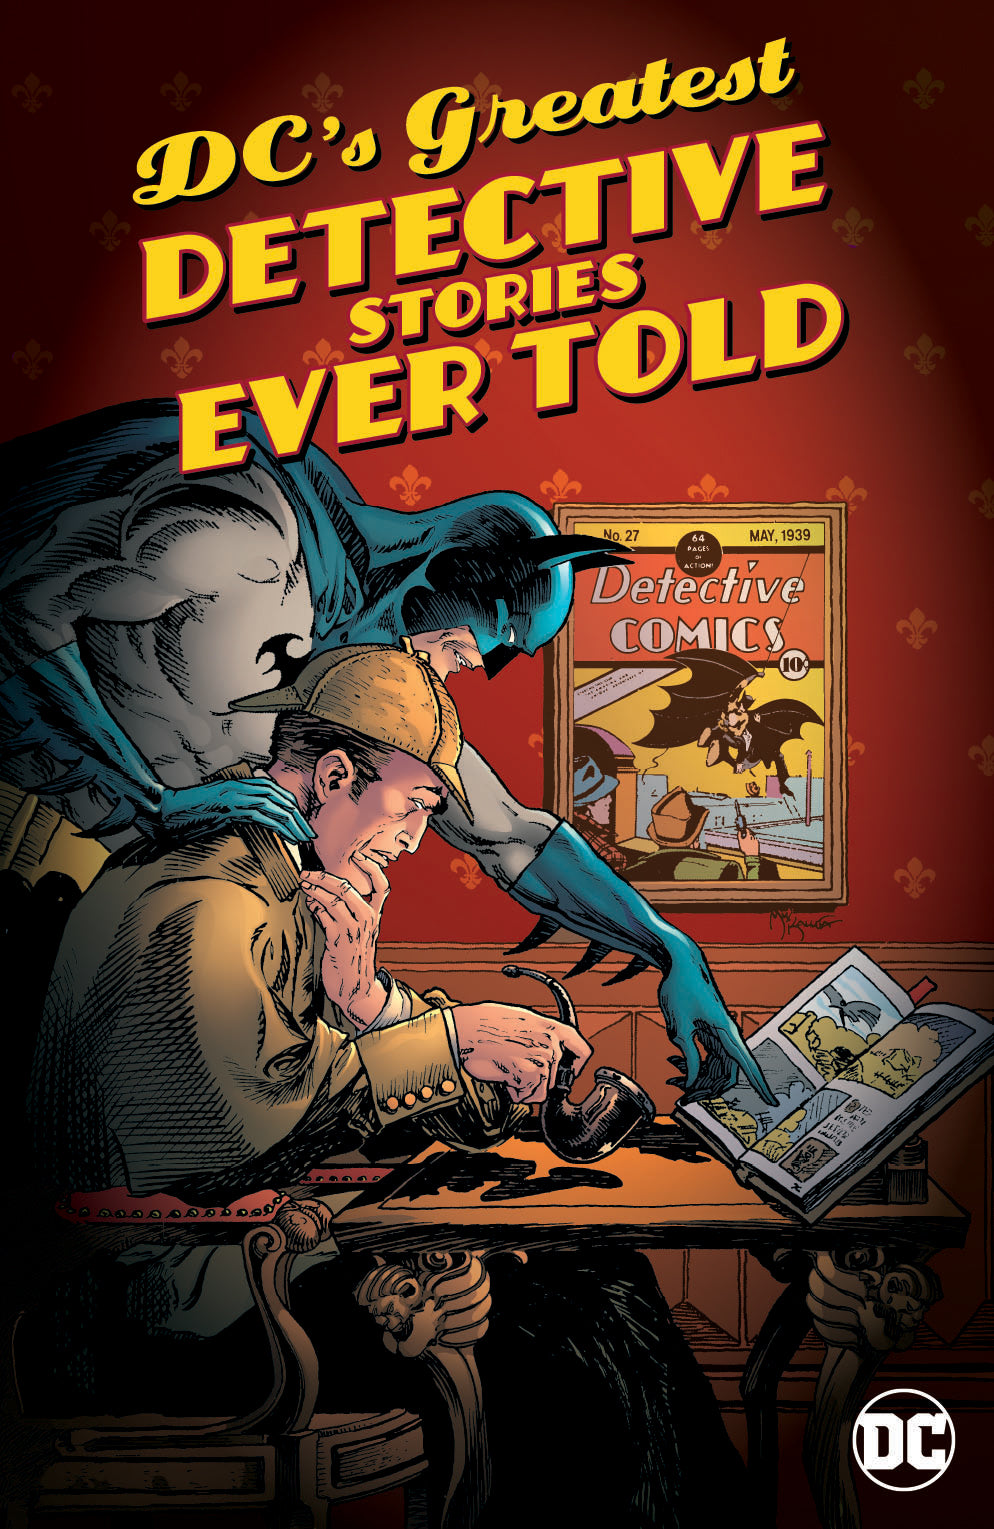 DCS GREATEST DETECTIVE STORIES EVER TOLD TRADE PAPERBACK